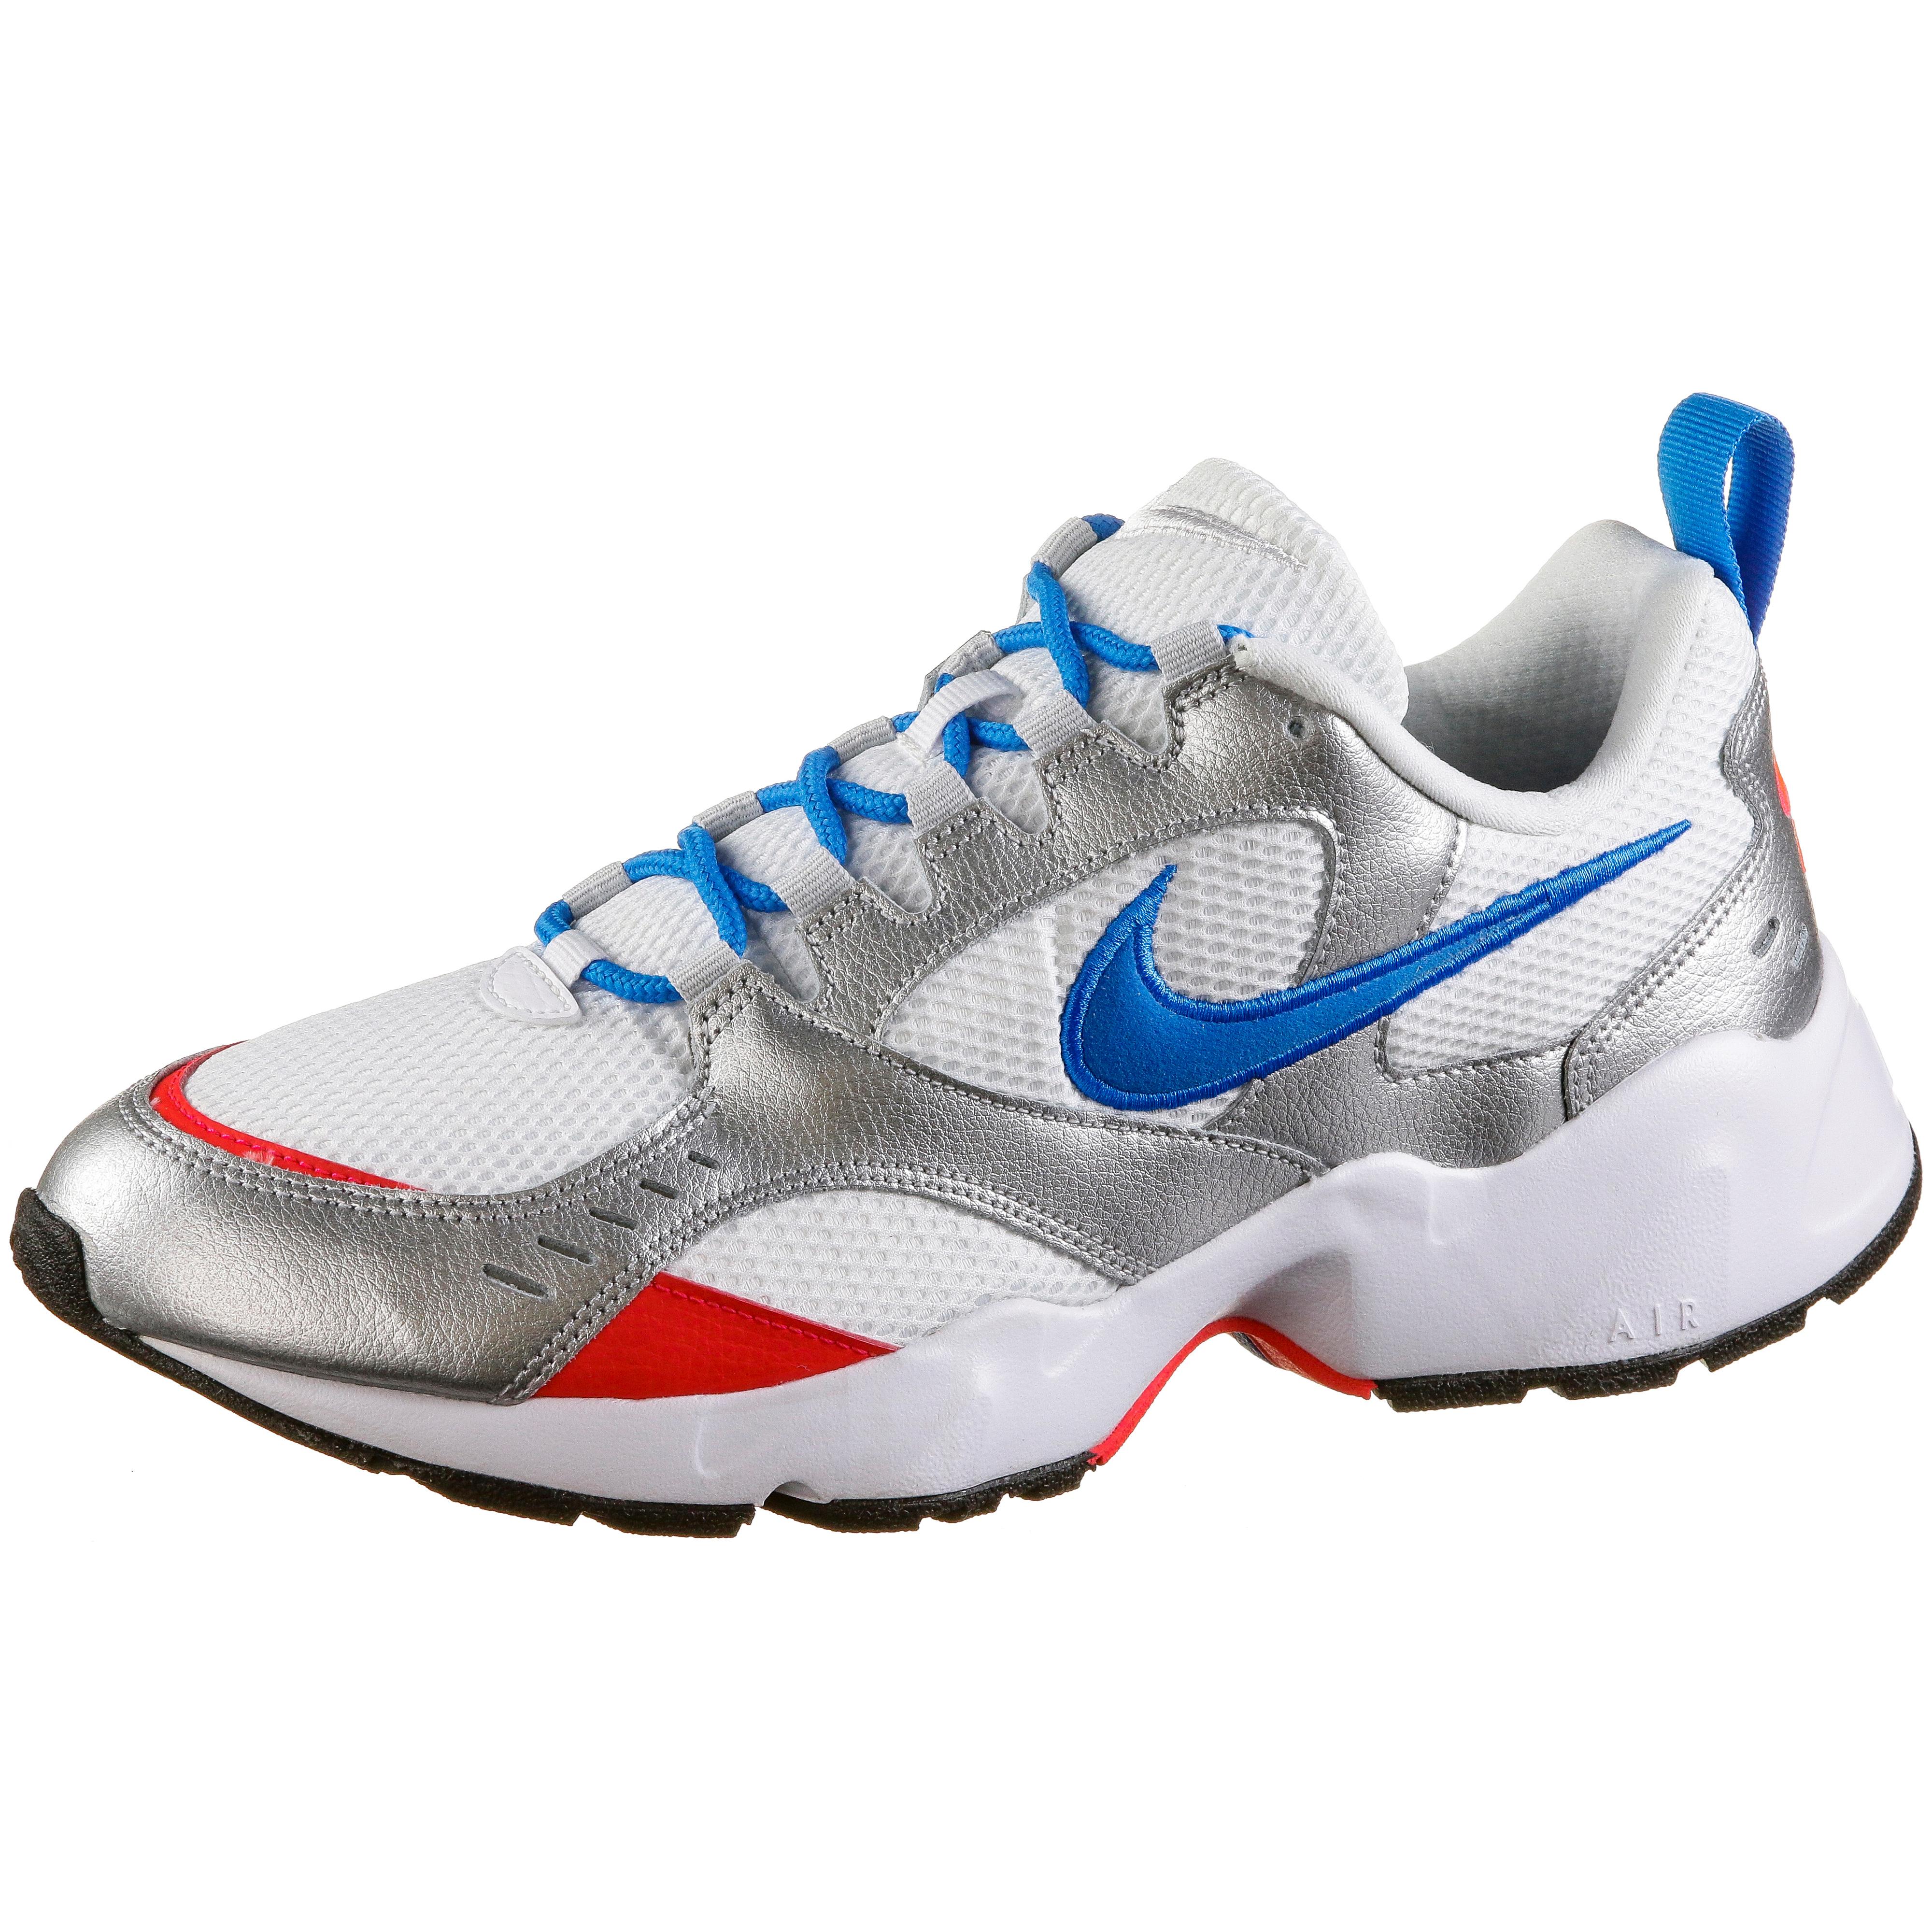 nike white and blue air heights sneakers